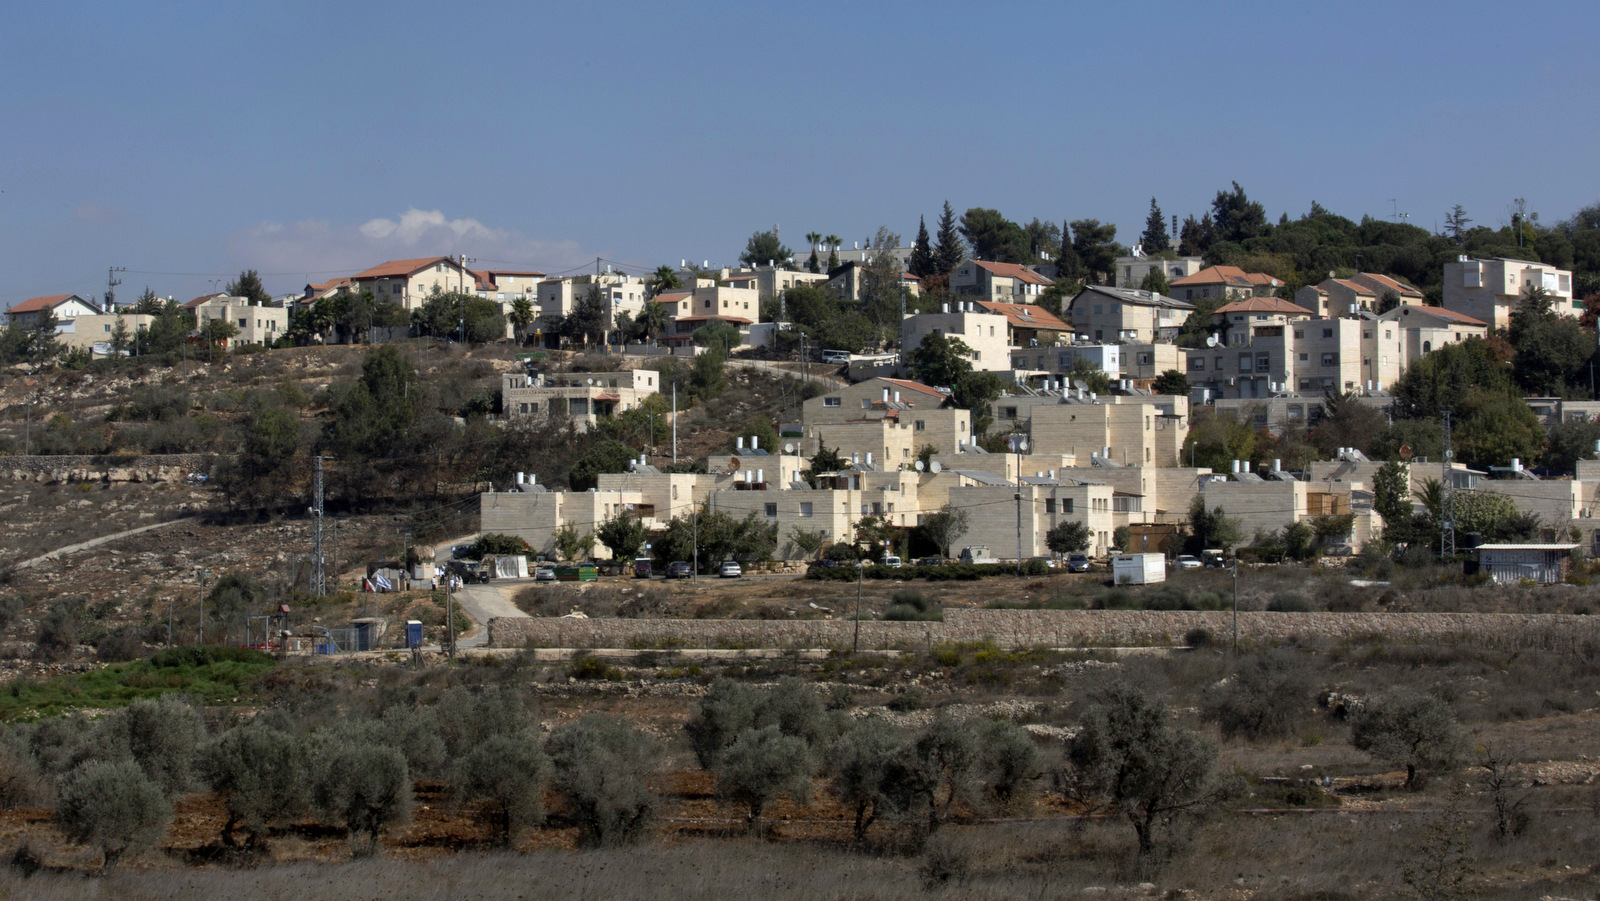 This Oct. 24, 2016 photo, shows part of the Israeli settlement of Beit El, near the West Bank city of Ramallah. Tax records show the family of U.S. president-elect Donald Trump's son-in-law, Jared Kushner, has donated tens of thousands of dollars to Israeli settlement institutions in the West Bank in recent years. (AP/Nasser Nasser)